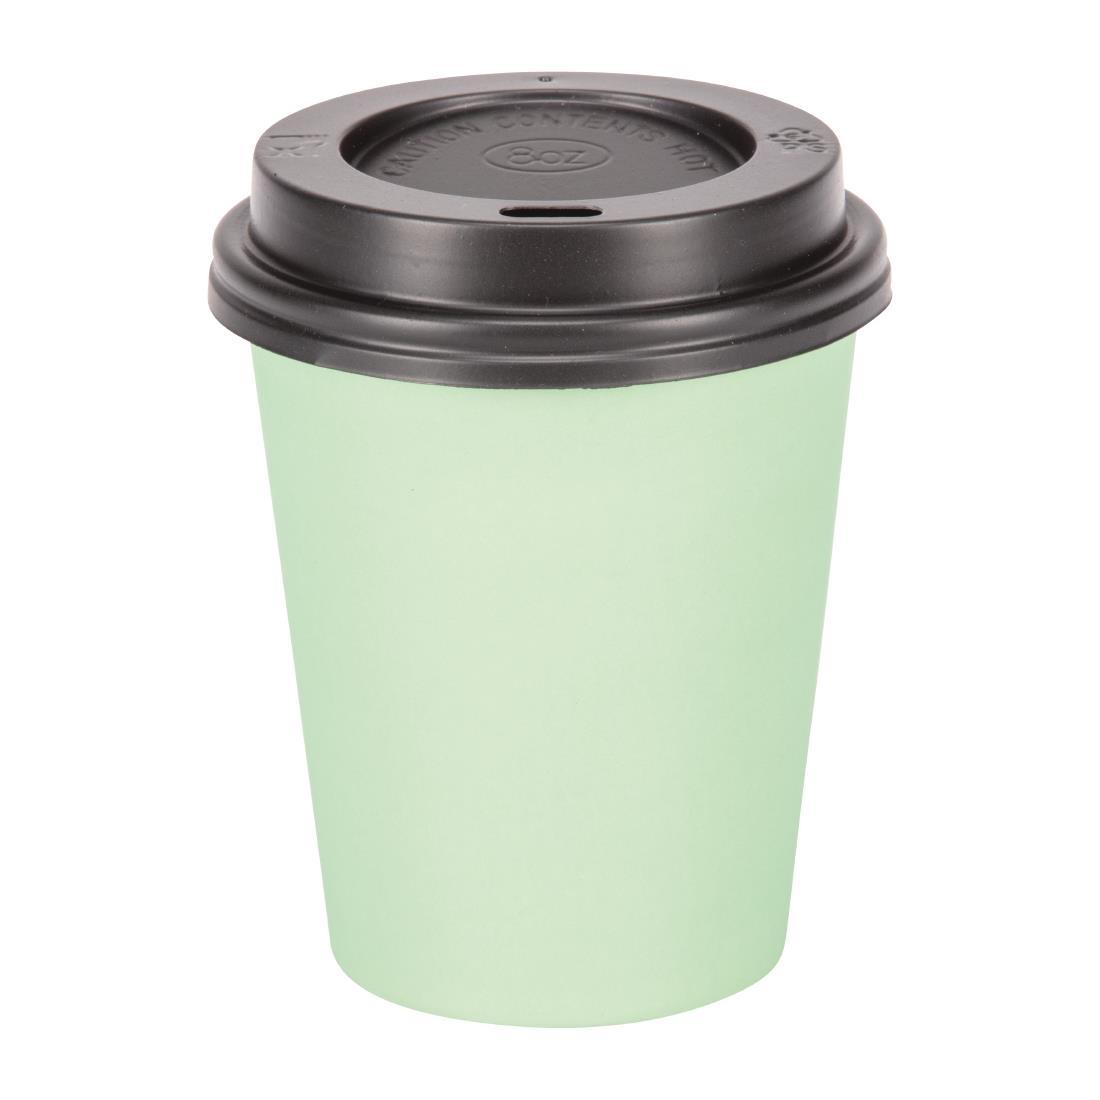 Fiesta Recyclable Coffee Cups Single Wall Turquoise 225ml / 8oz (Pack of 1000) - GP403  - 2